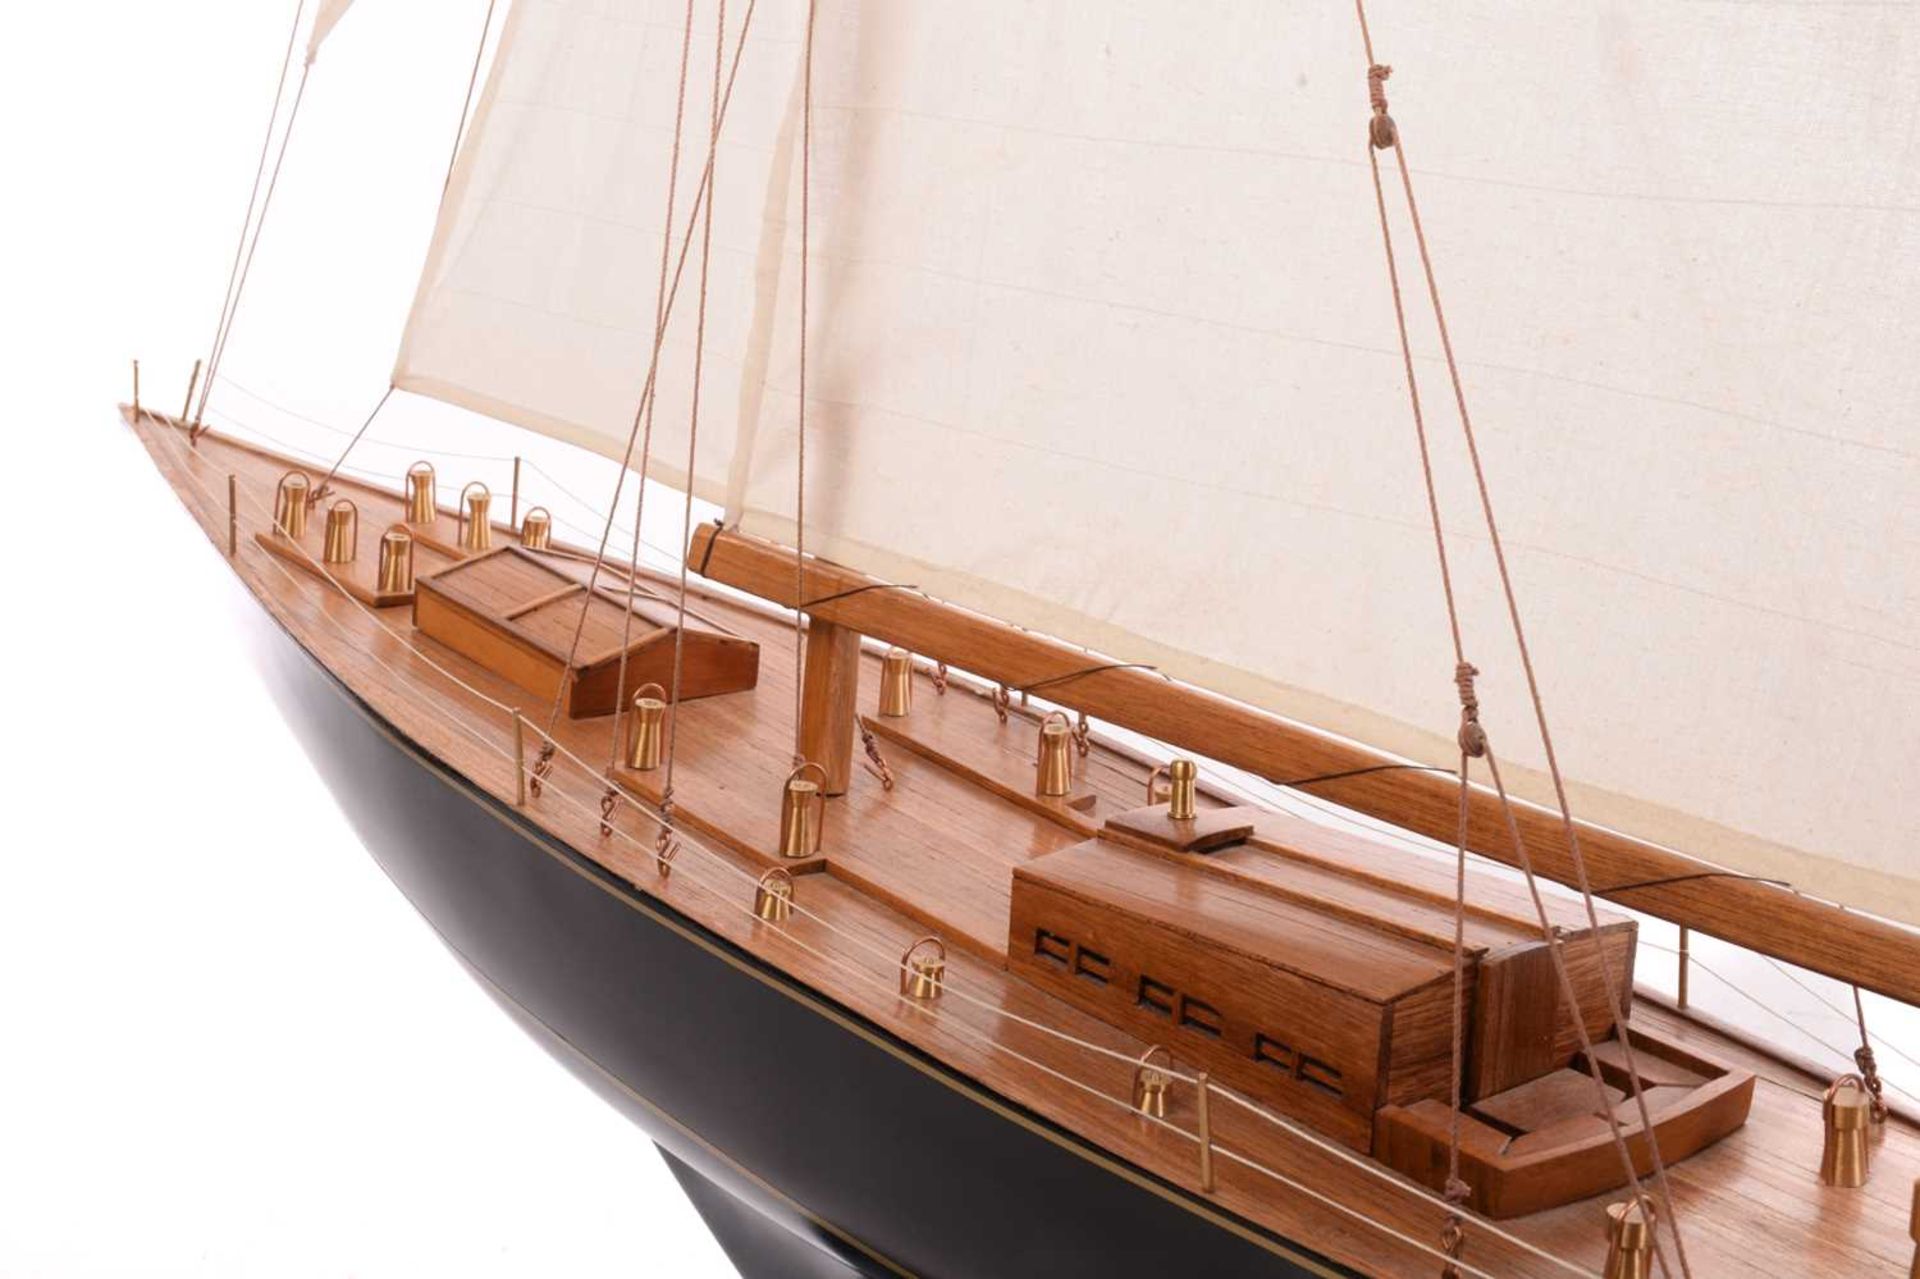 A painted and stained wood model of the yacht 'Endeavour', with fabric sales and rigging on a titled - Image 11 of 16